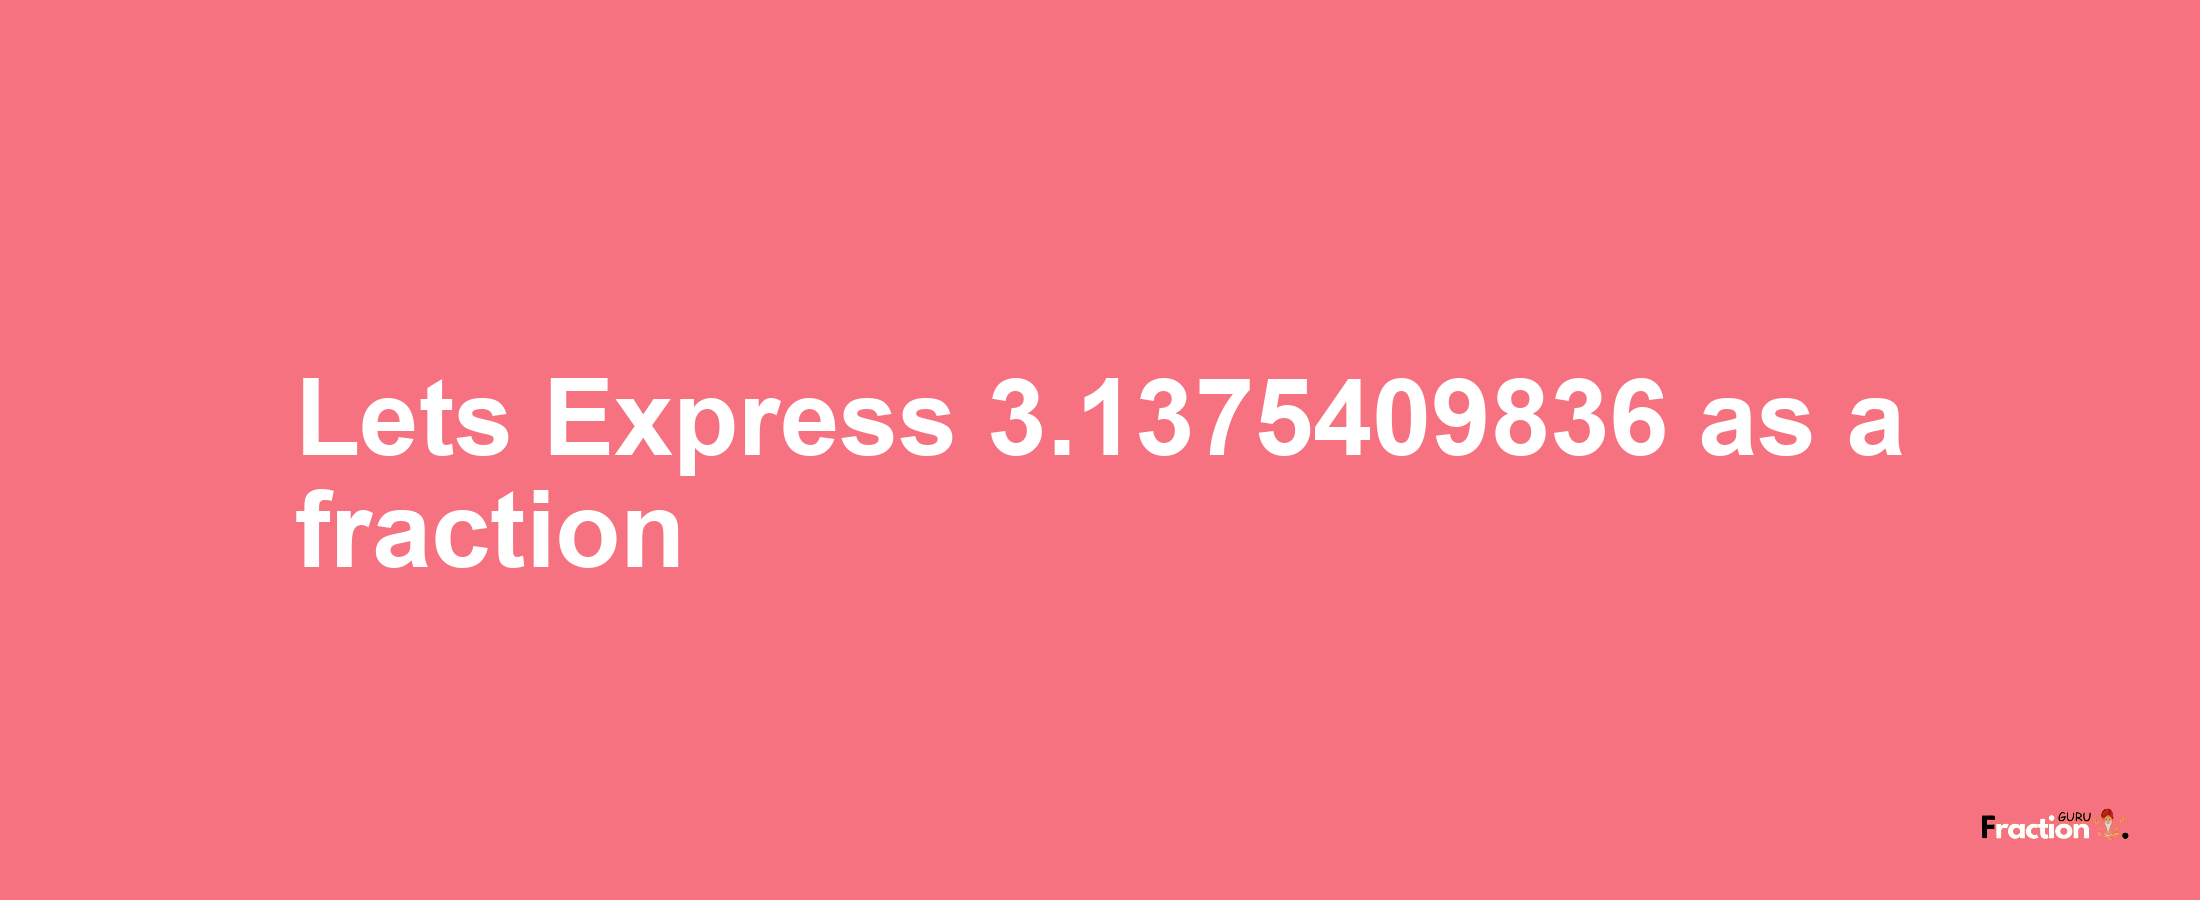 Lets Express 3.1375409836 as afraction